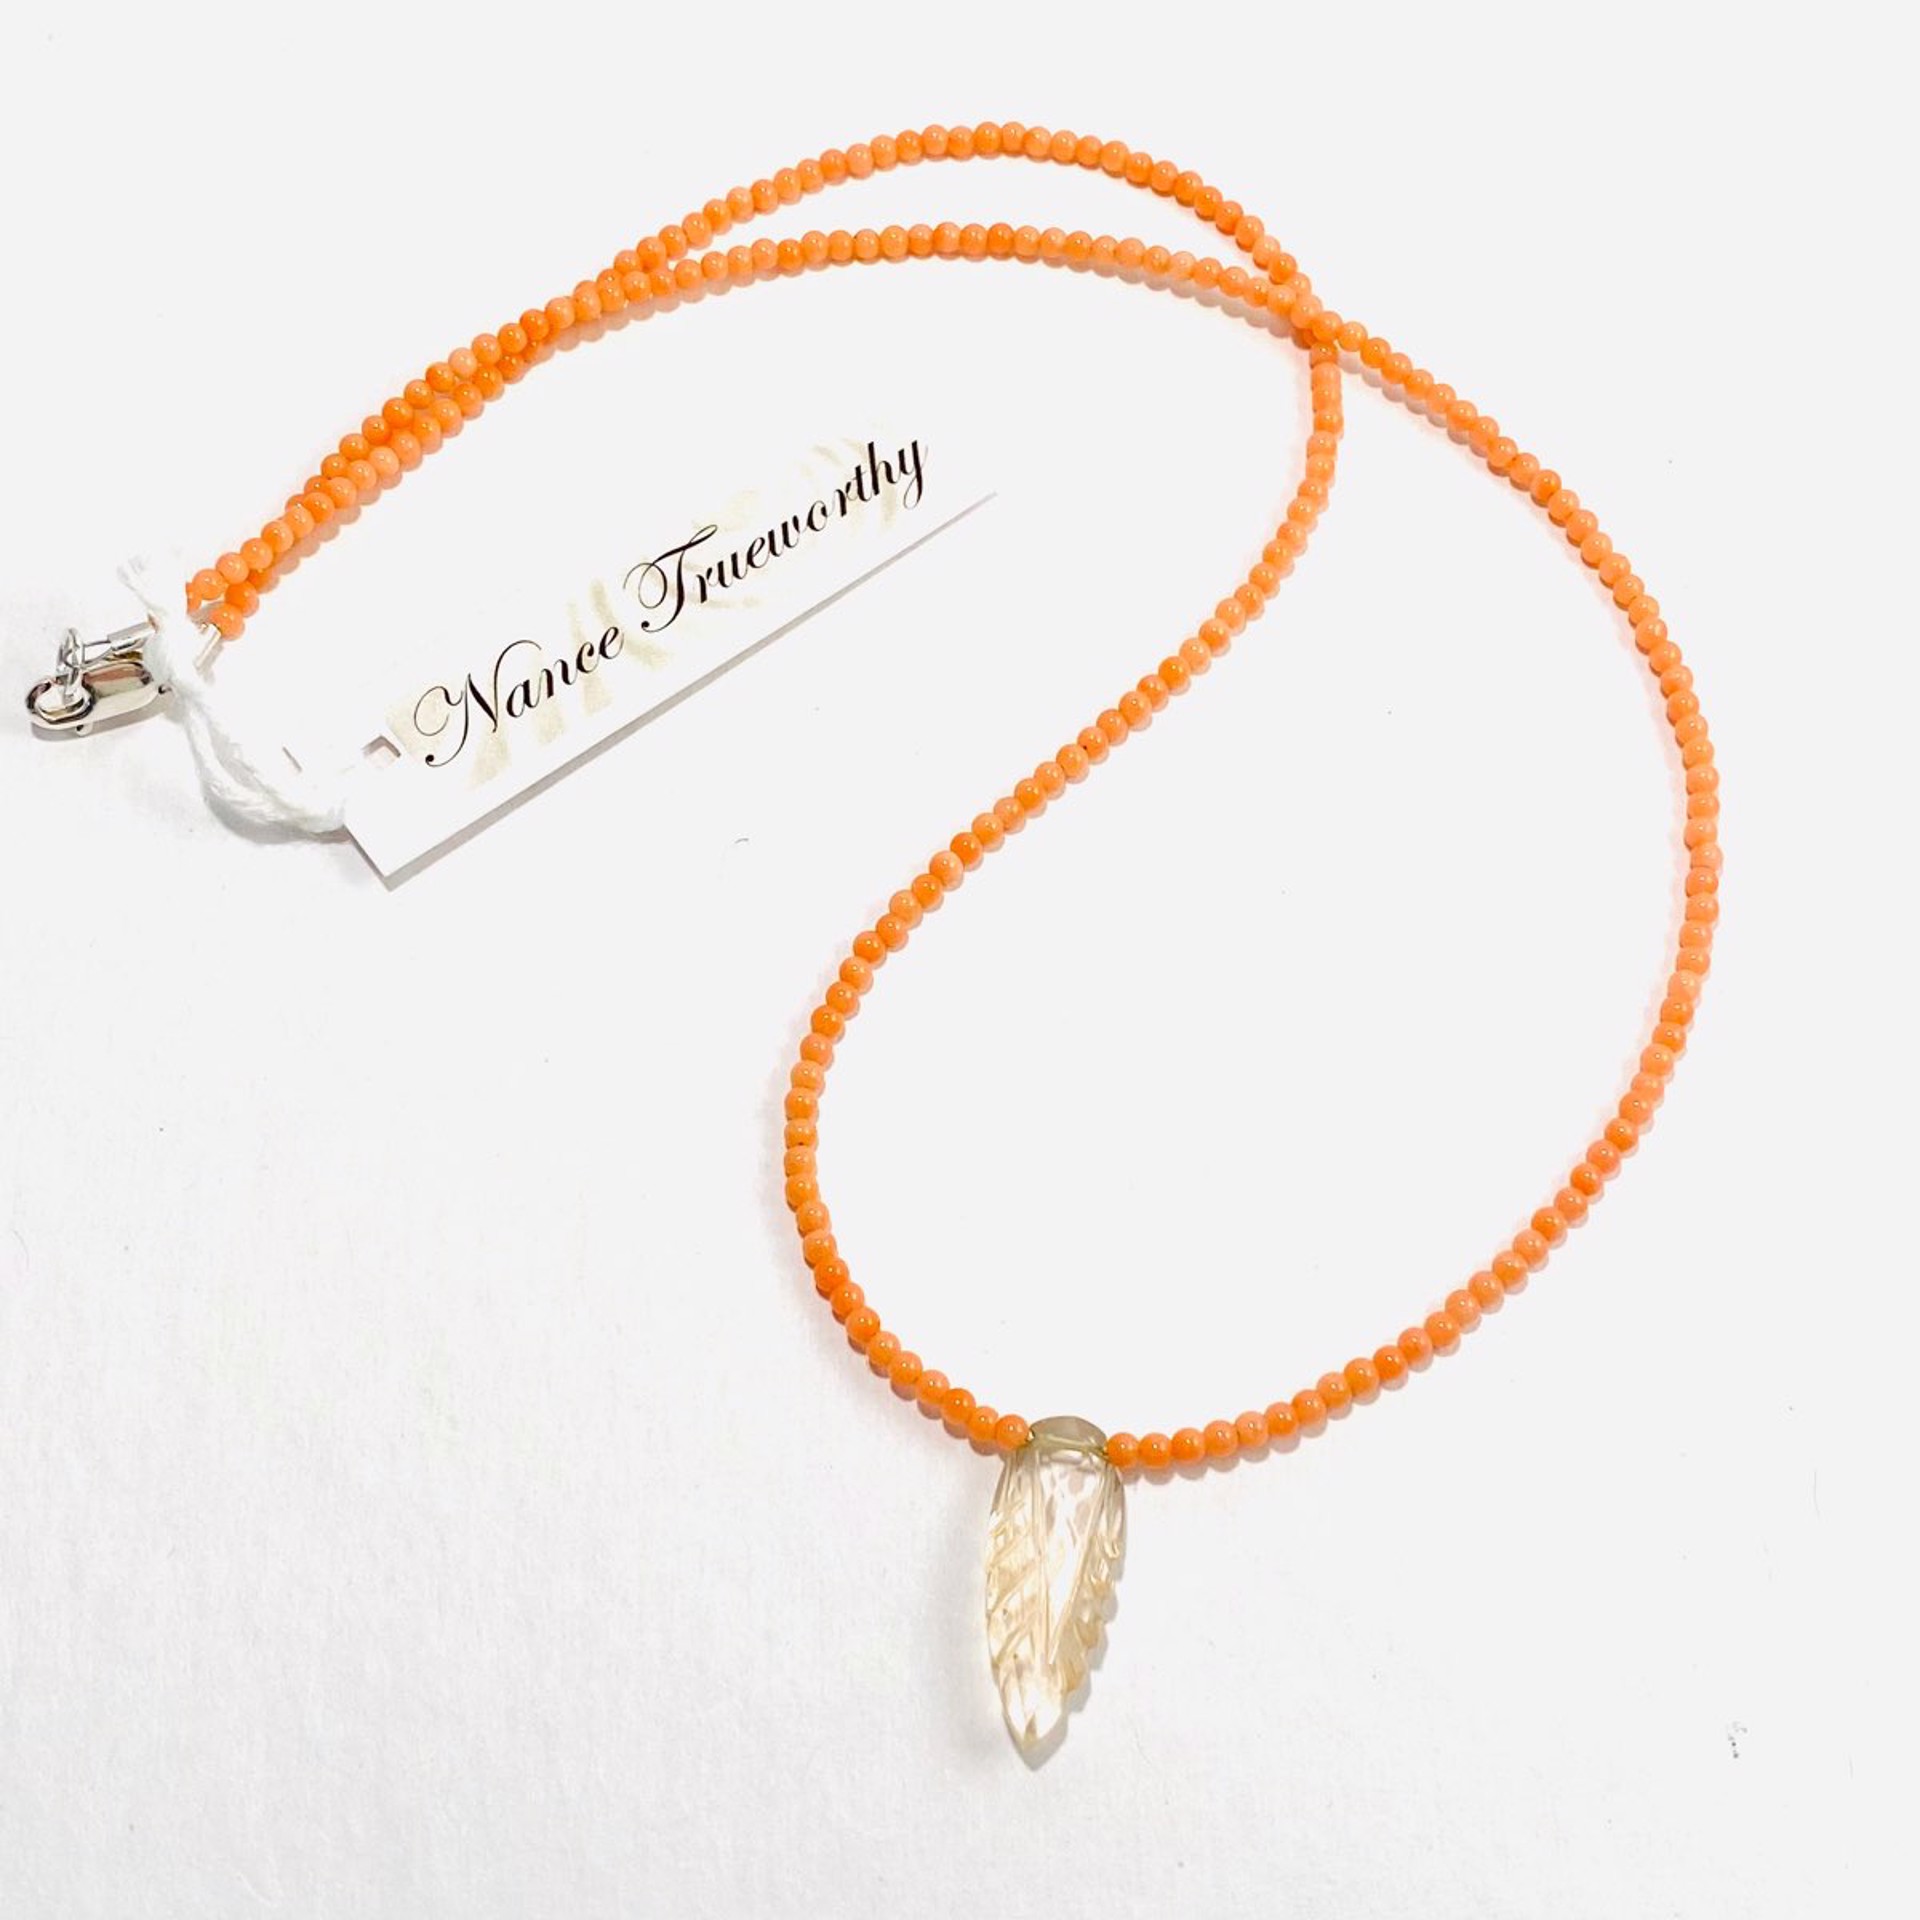 NT22-250 Tiny Round Coral Bead Carved Quartz Focal Necklace by Nance Trueworthy